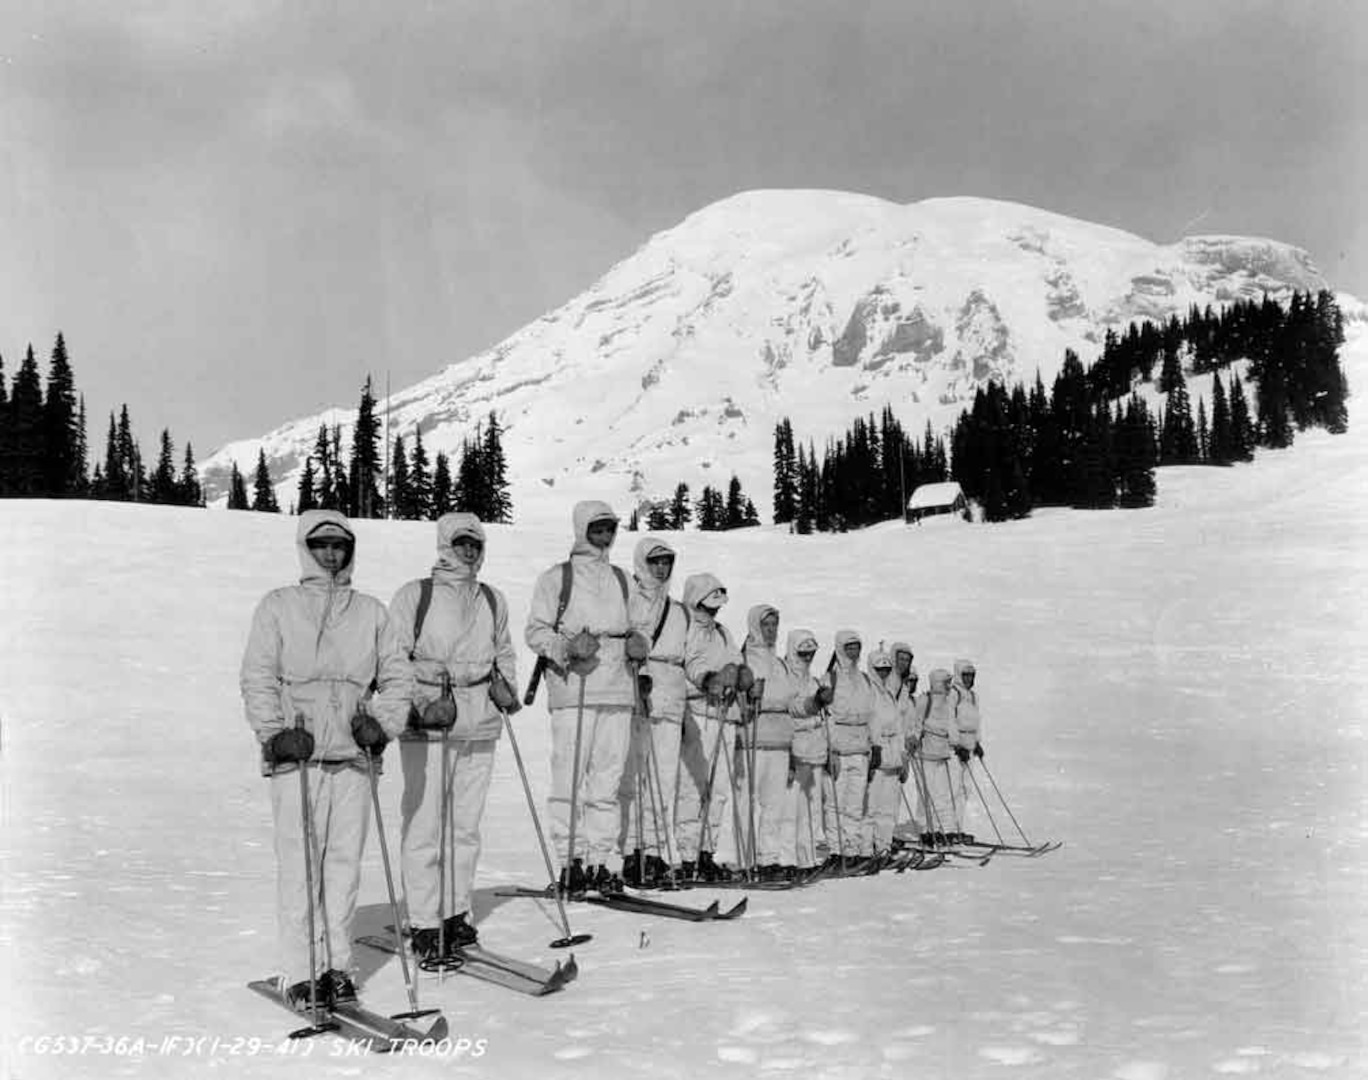 Pioneers of the 10th Mountain Division, the 87th Mountain Infantry Battalion, training in the United States in 1941. The unit was compromised of skiers, climbers and other outdoorsmen who trained vigorously. (Photo courtesy of World War II Today)